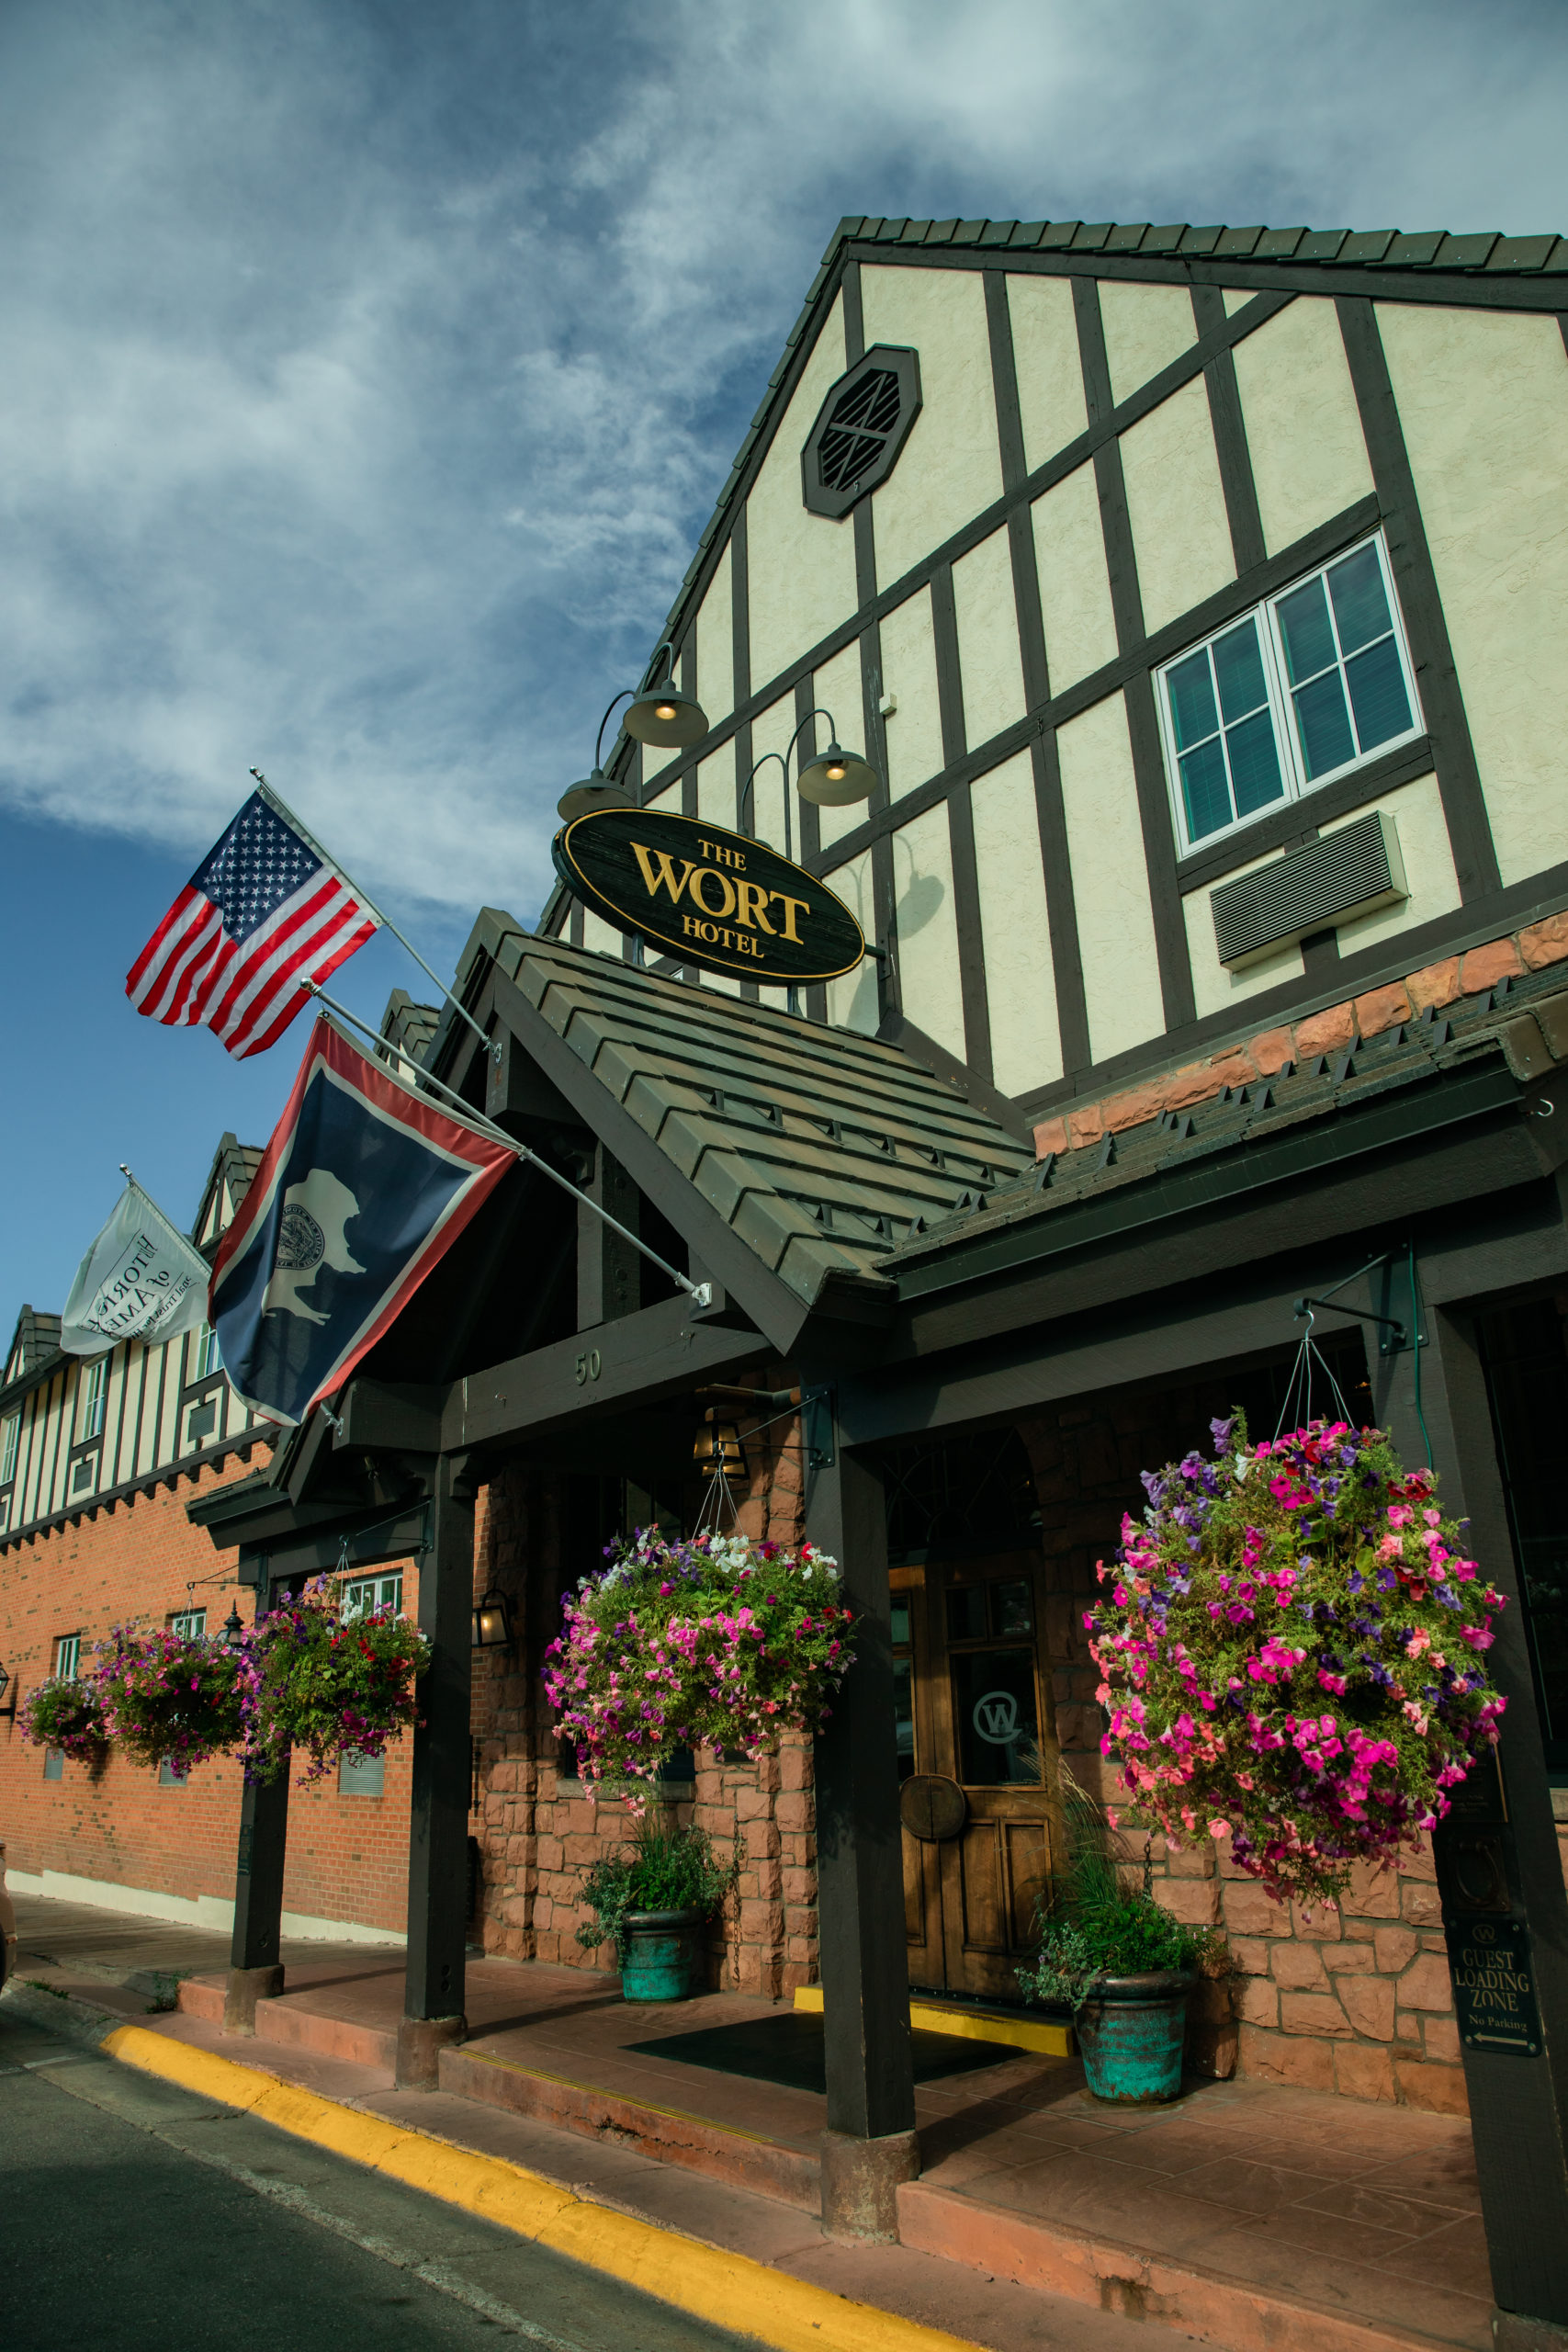 The Wort hotel and restaurant in Jackson Hole WY outside of building with flag and flowers